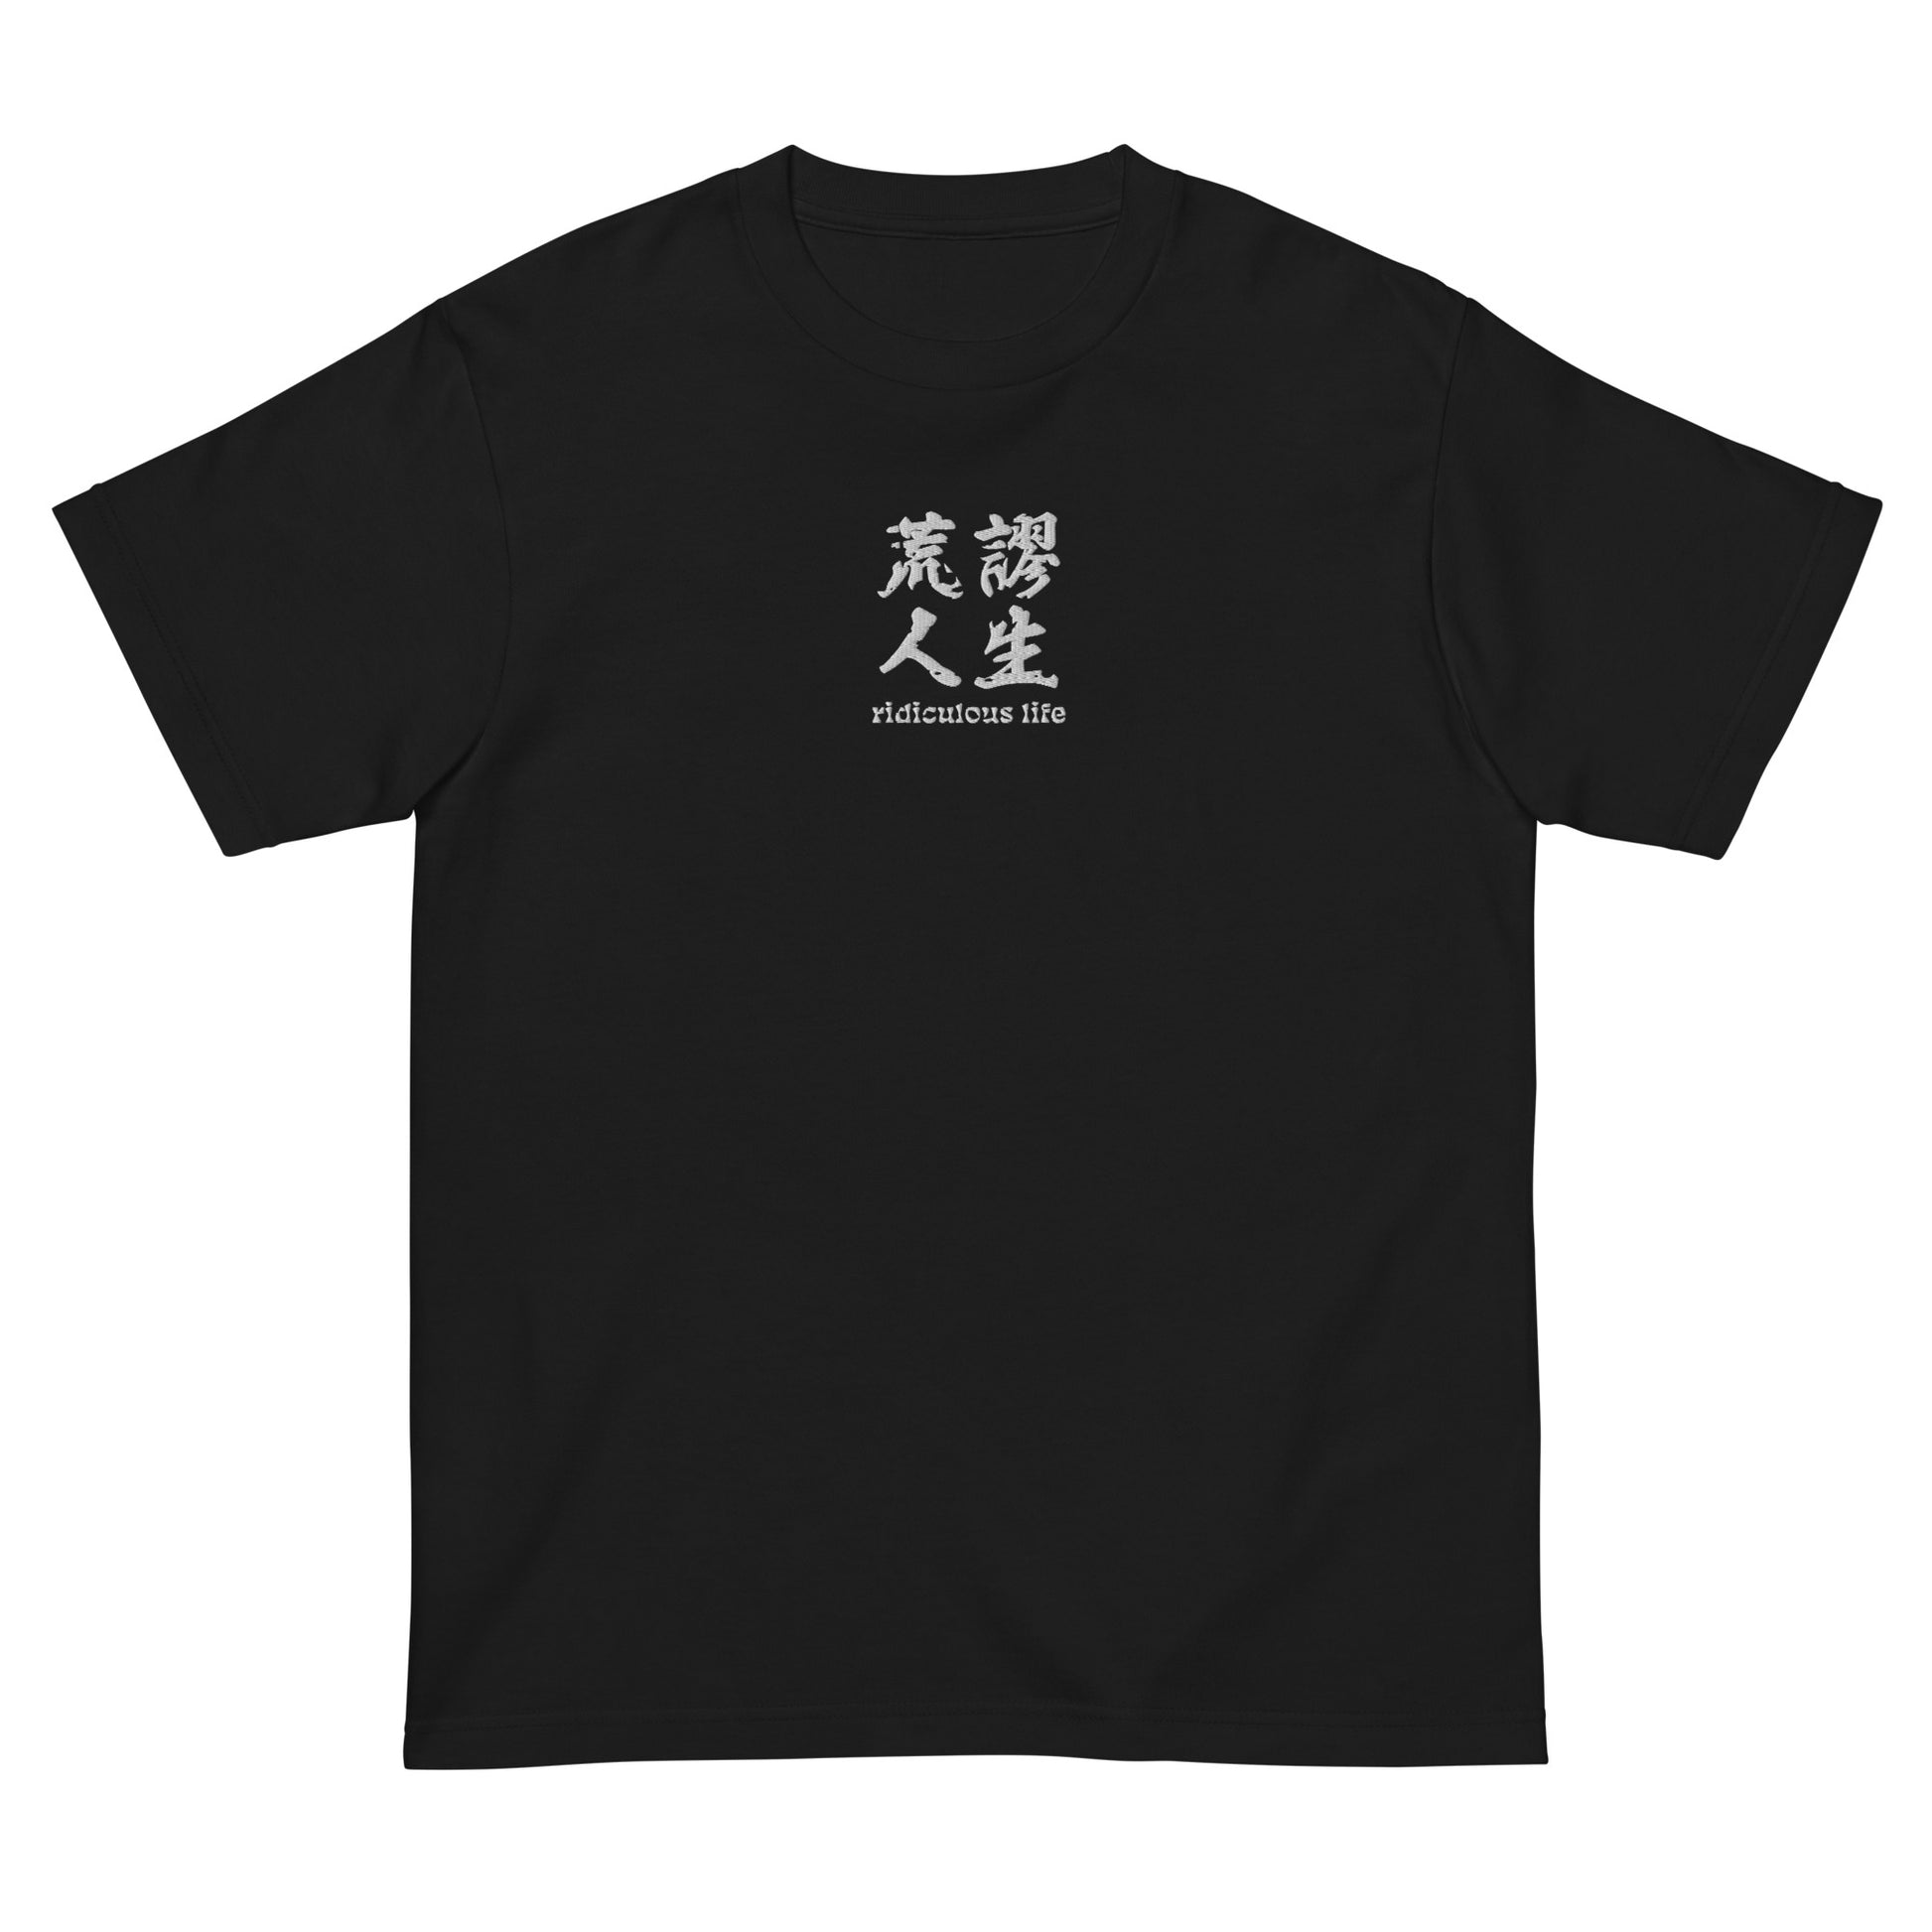 Black High Quality Tee - Front Design with an Black Embroidery "Ridiculous Life" in Chinese and English